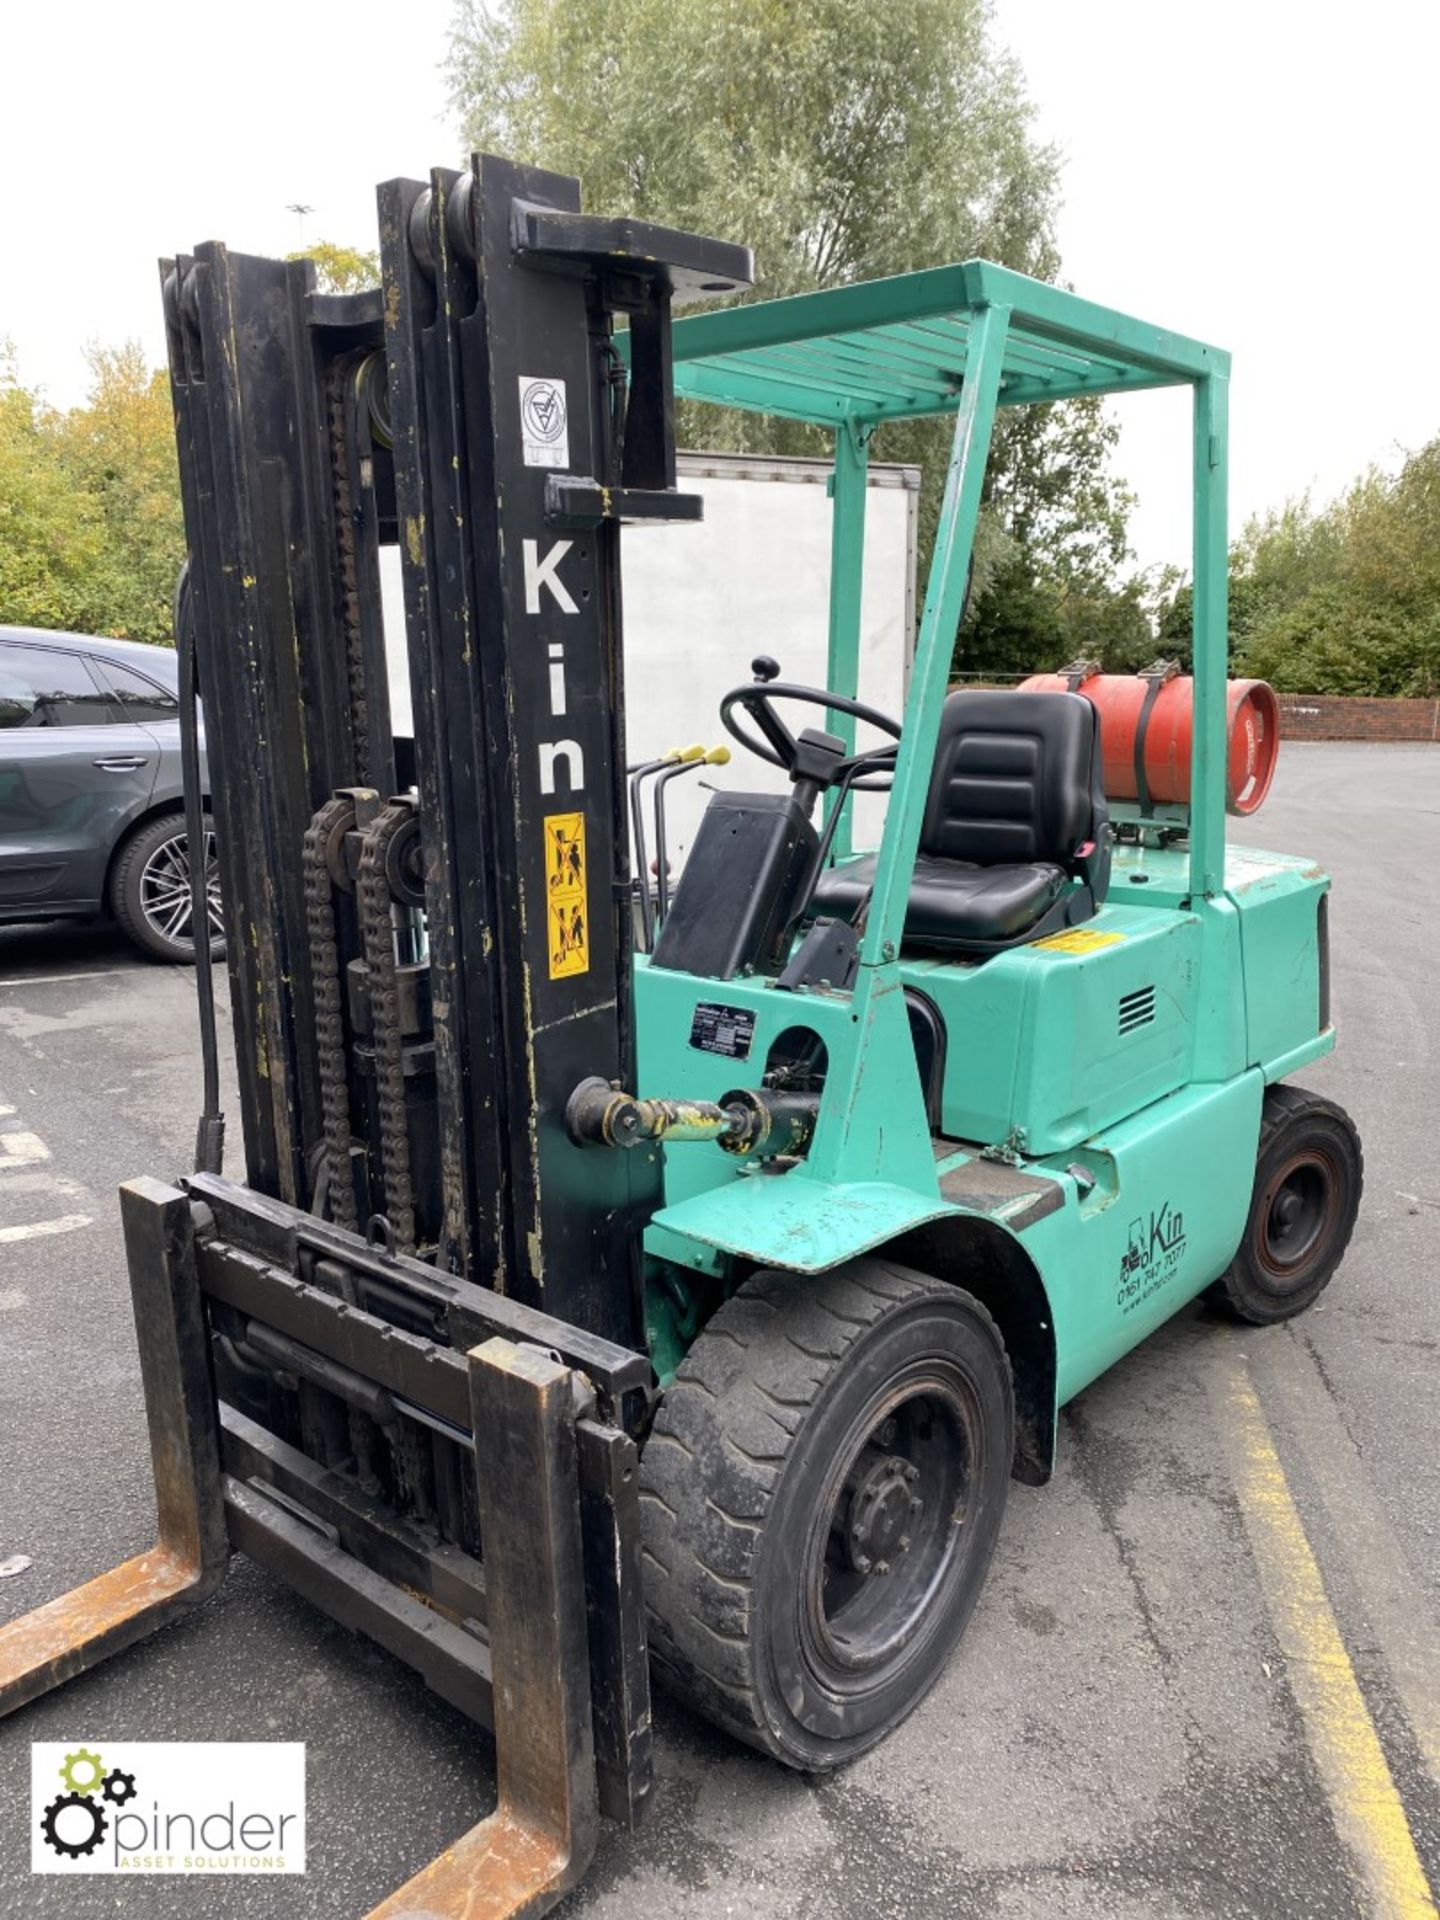 Mitsubishi FG-30 LPG Forklift Truck, 3000kg capacity, 4300mm lift height, triplex container spec - Image 8 of 17